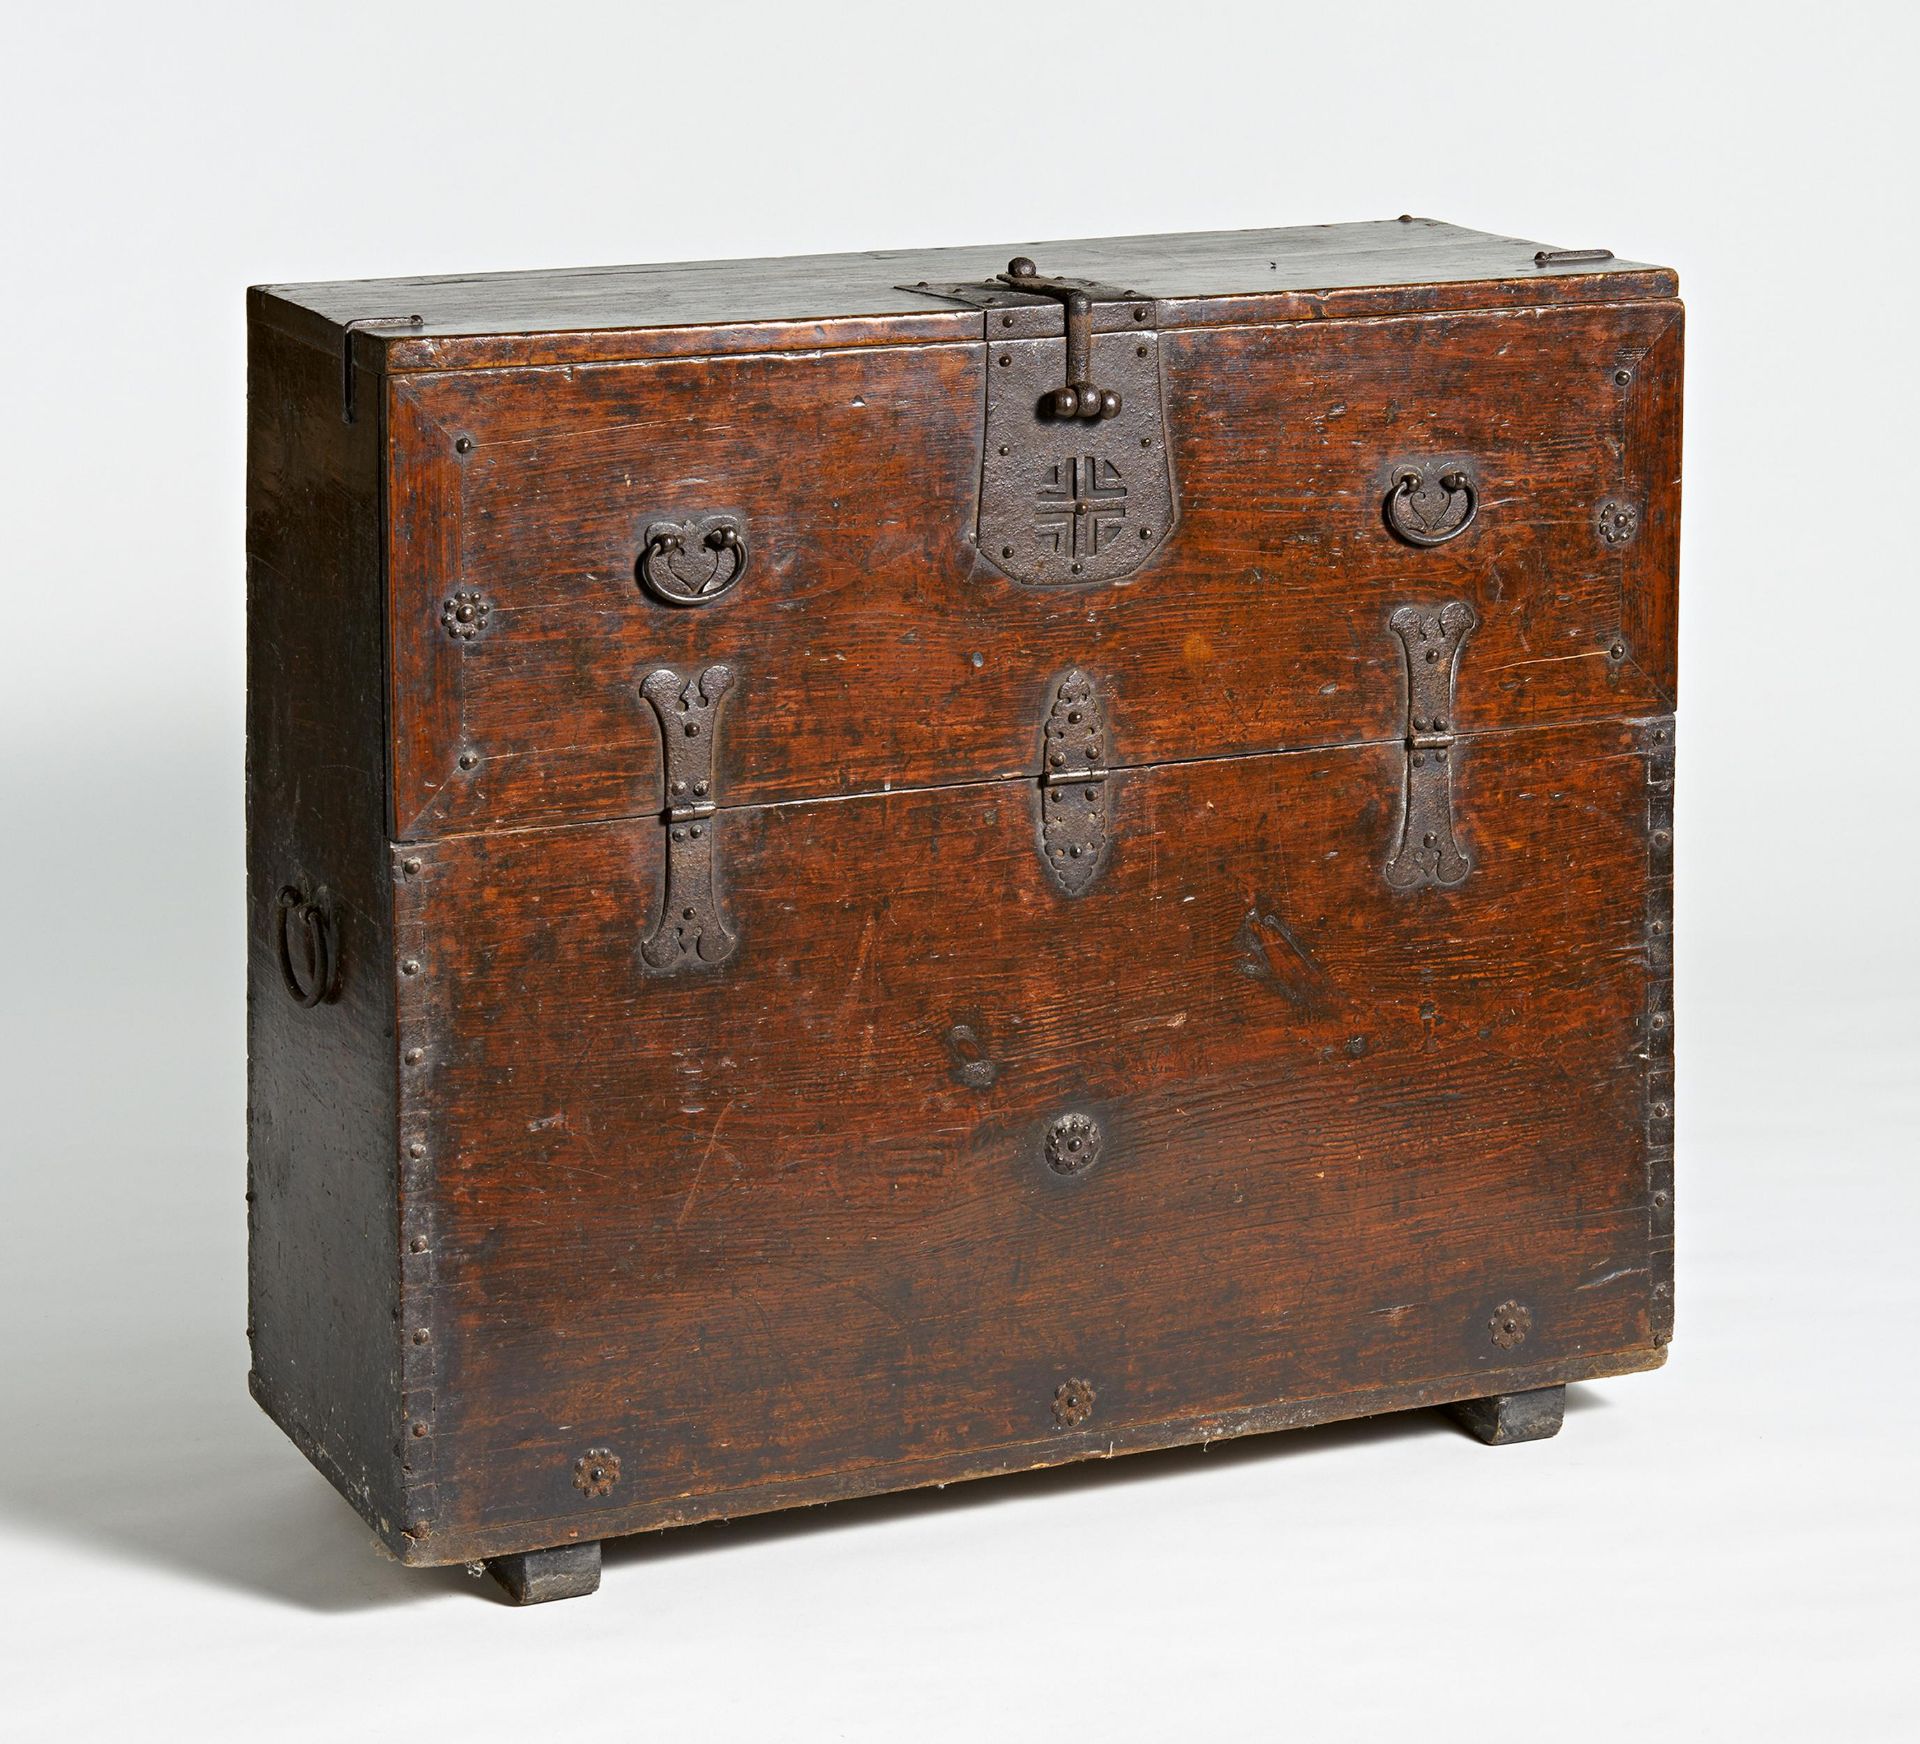 ONE PART CHEST (BANDAJI) WITH FRONTAL FLAP. Korea. Ca. 1900. Wood, lacqured. Fittings from iron. H.